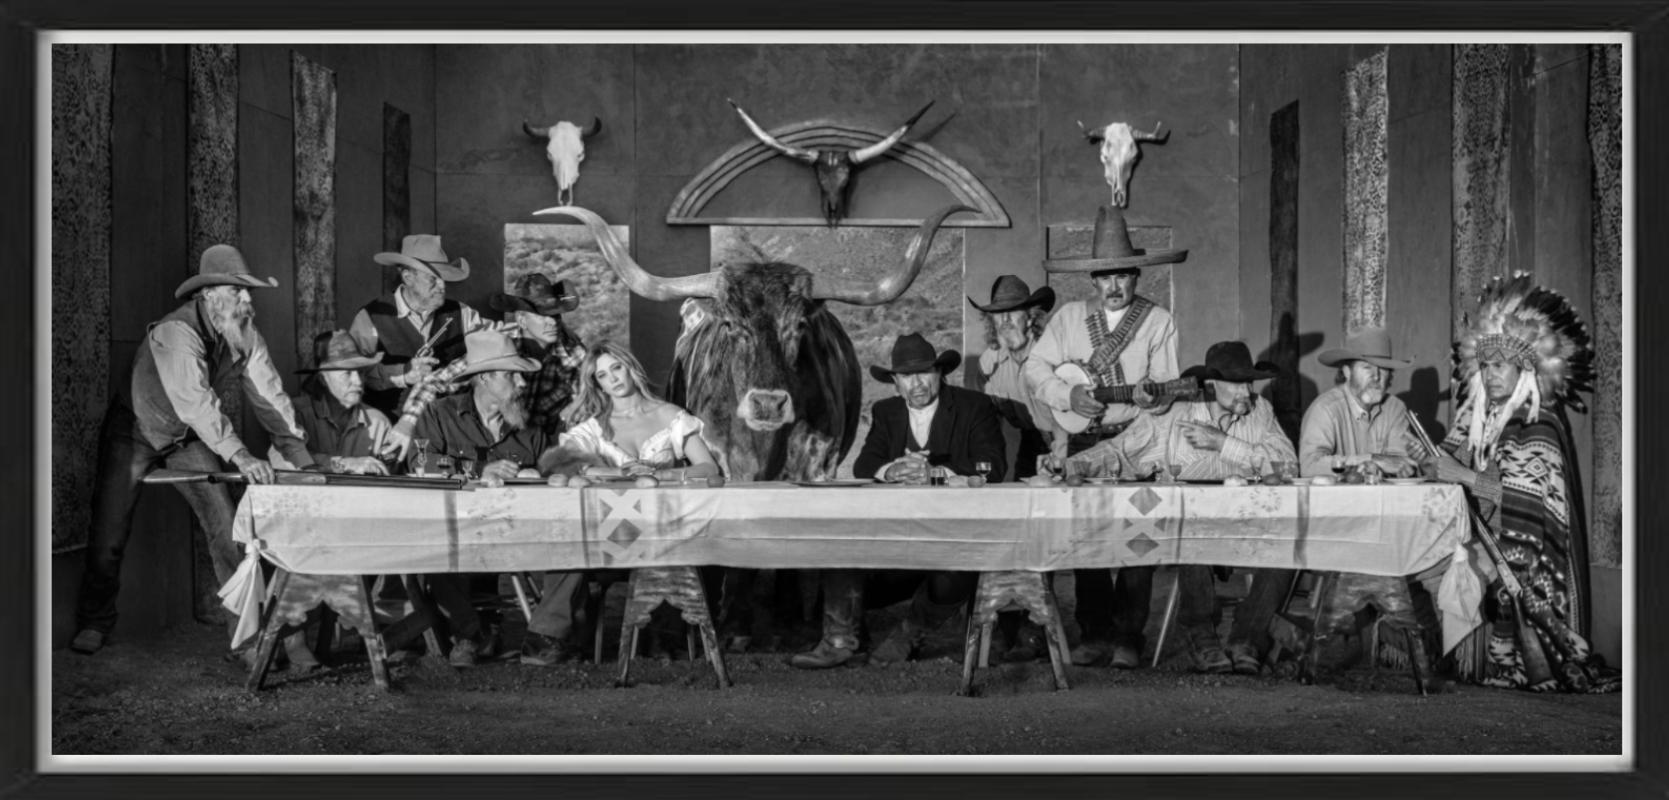 David Yarrow Black and White Photograph - Last supper in texas - model and cowboys dining in western look